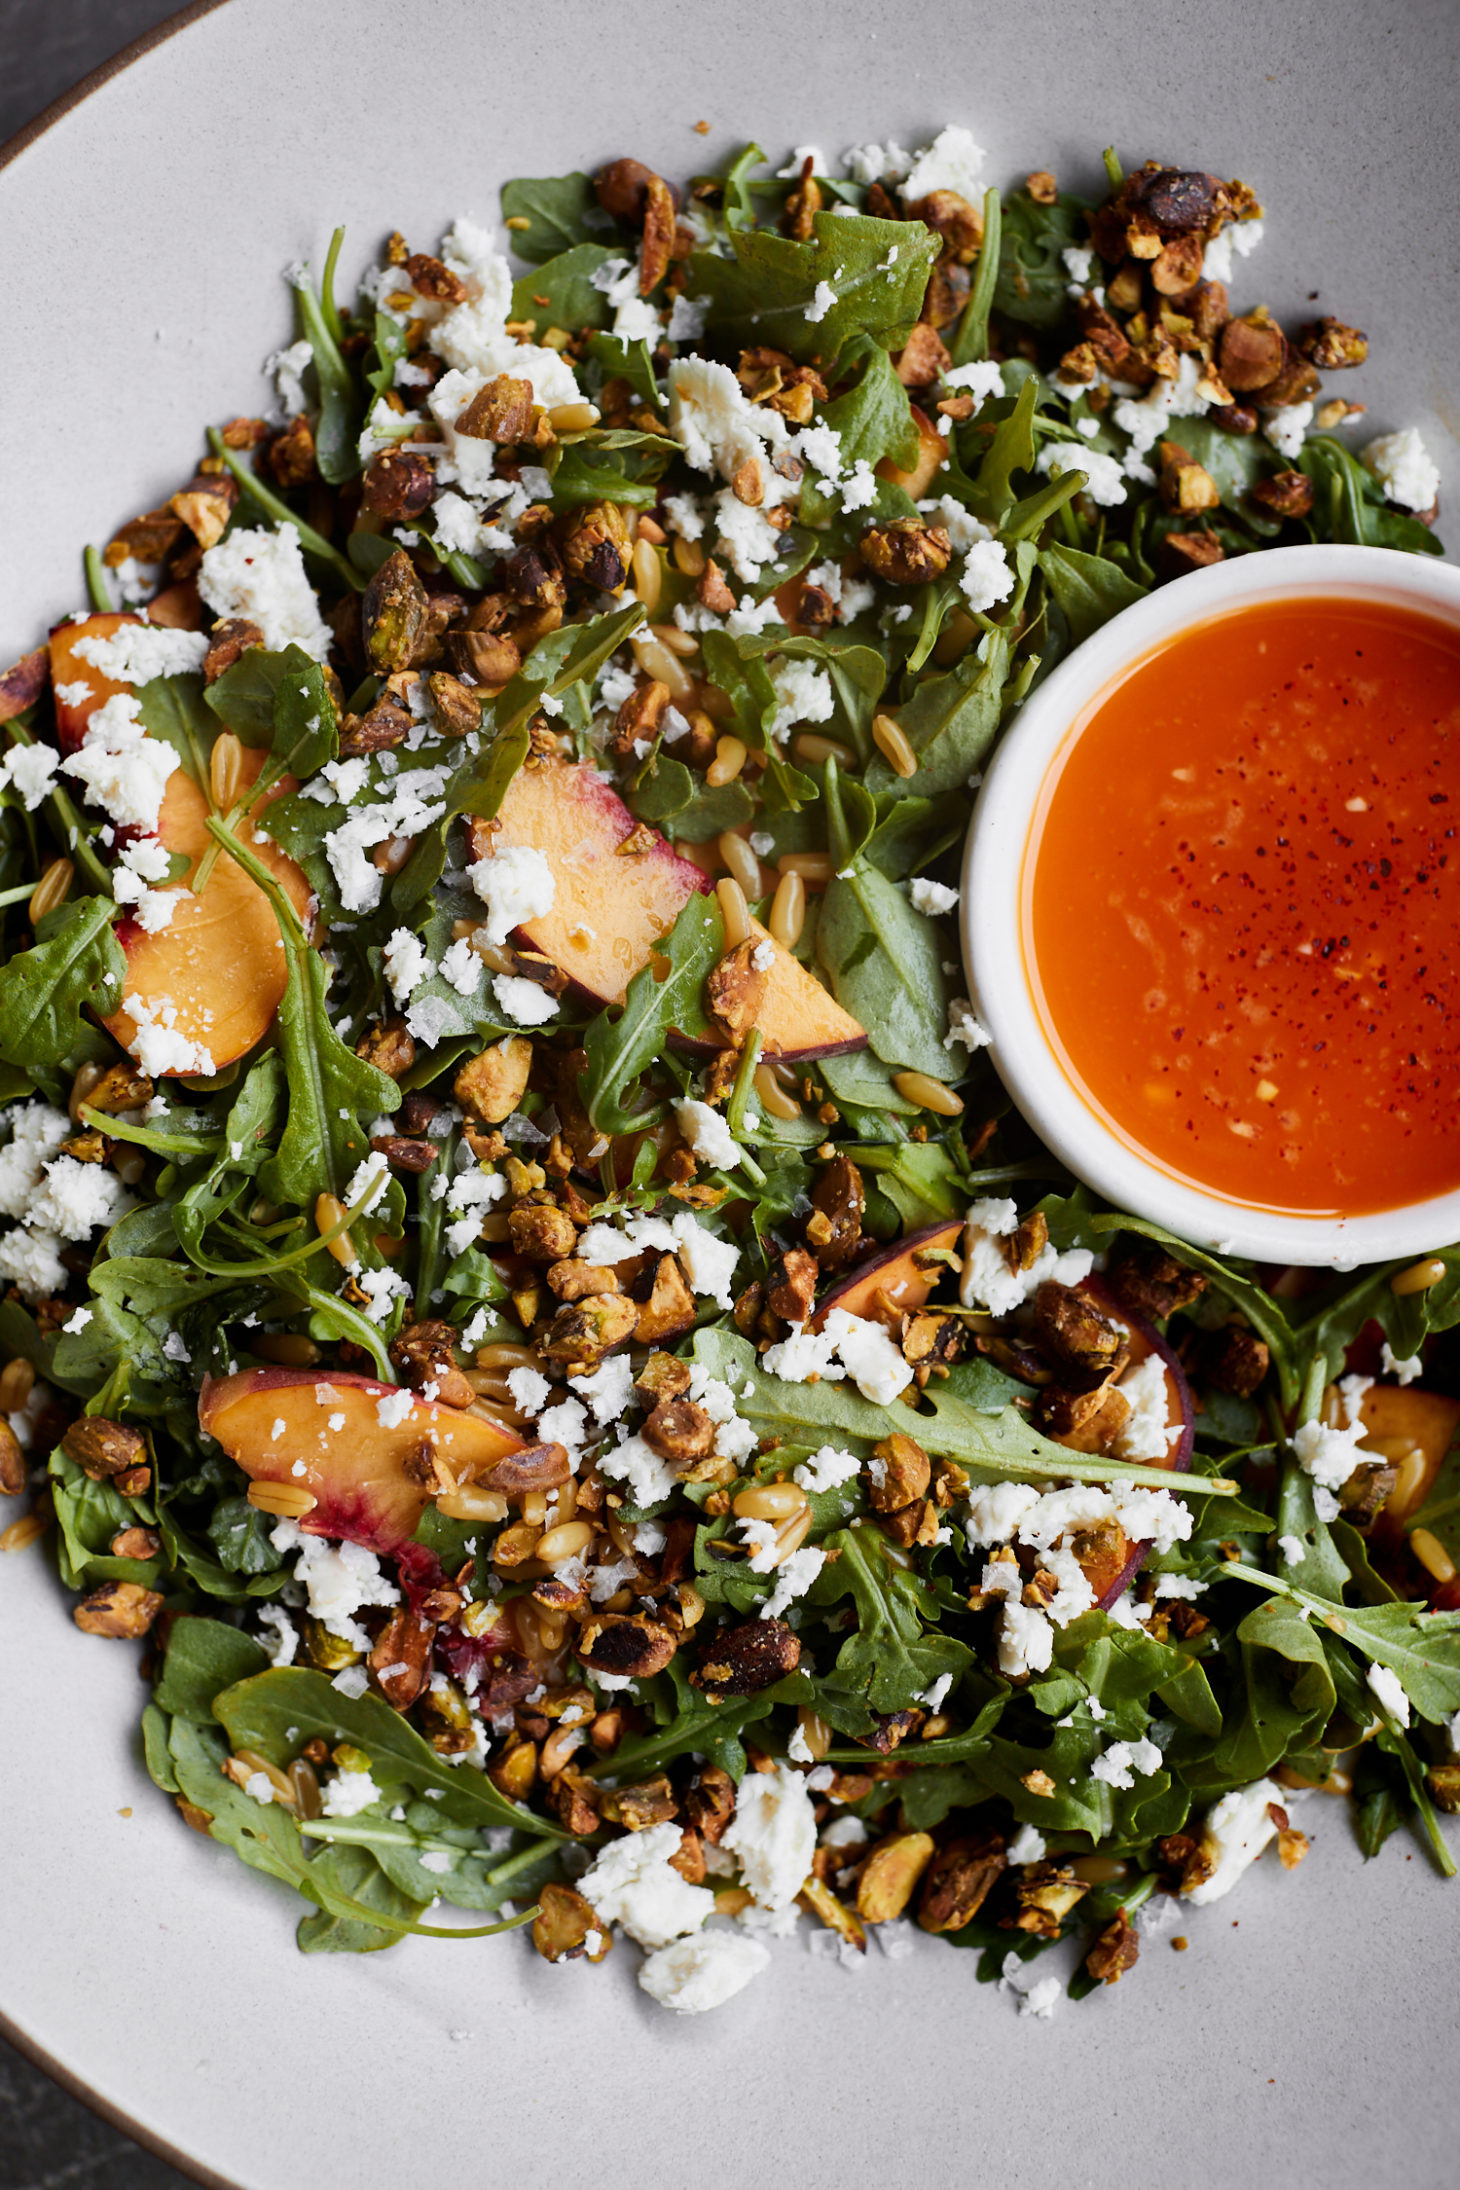 Peach Salad with Maple Pistachios and Chile Butter Dressing